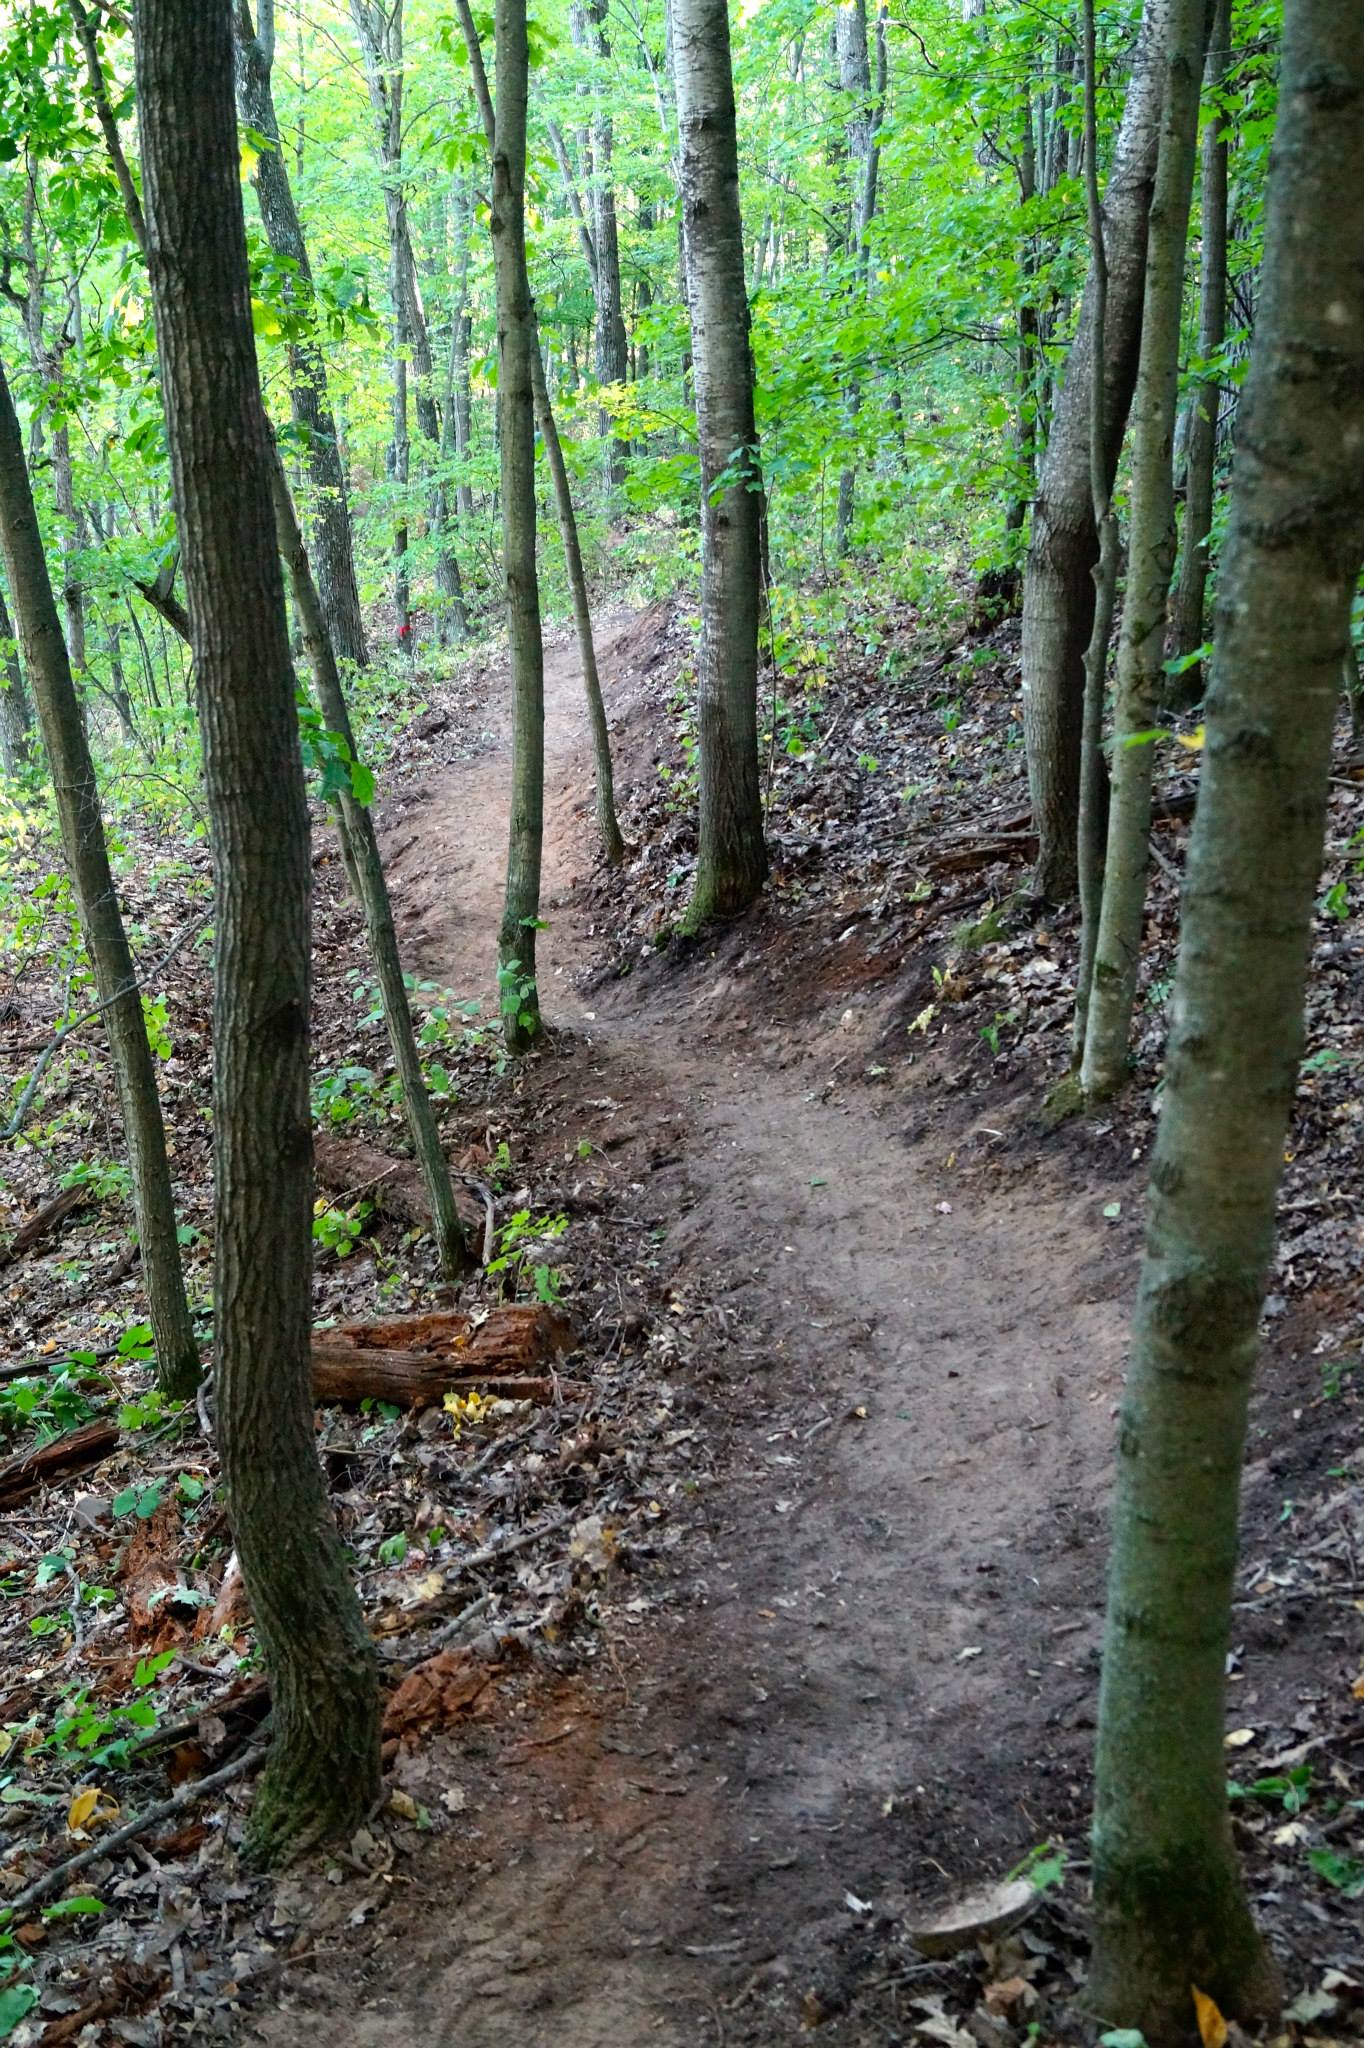 New trail takes hikers into the forest